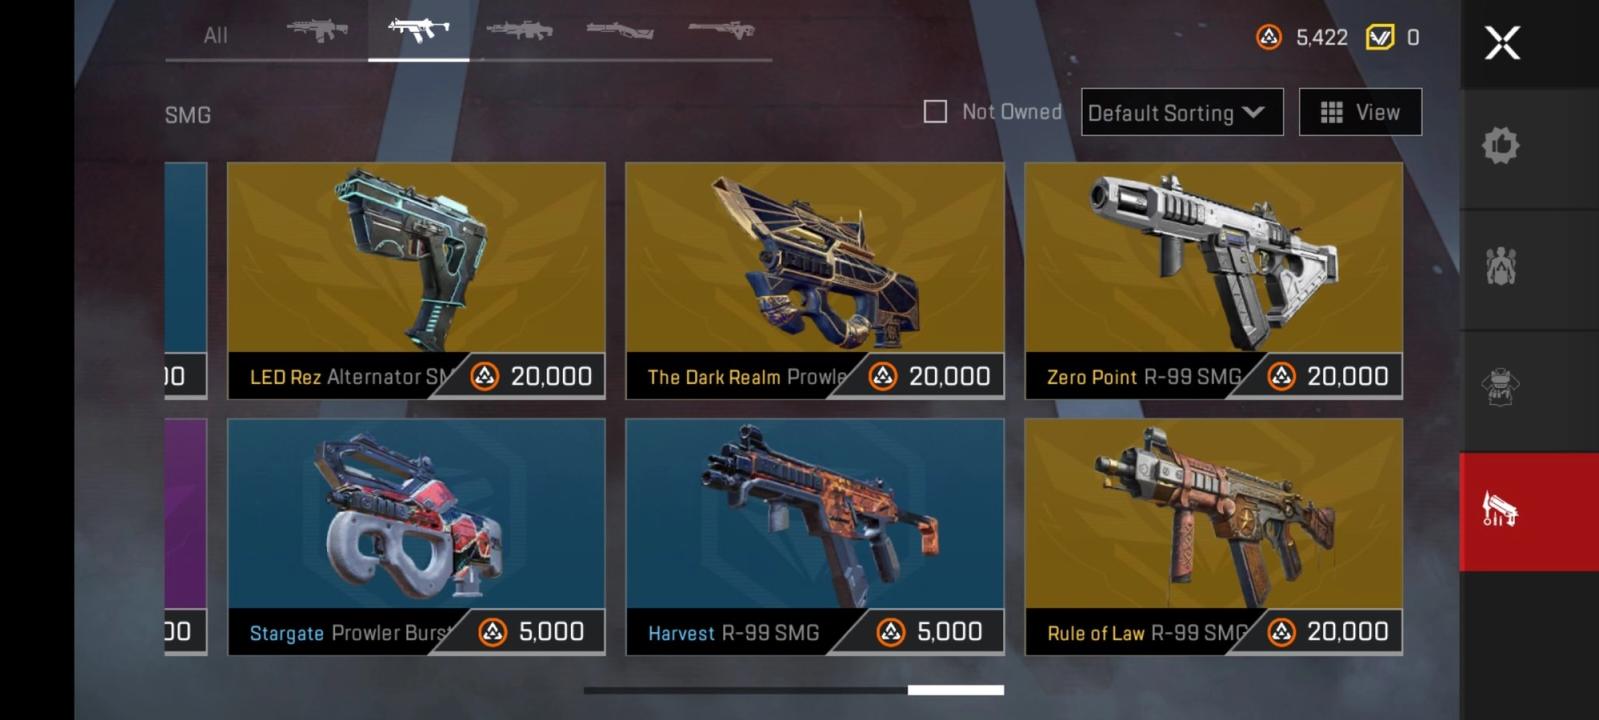 Six skins for Apex Legends Mobile weapons in an in-game menu.